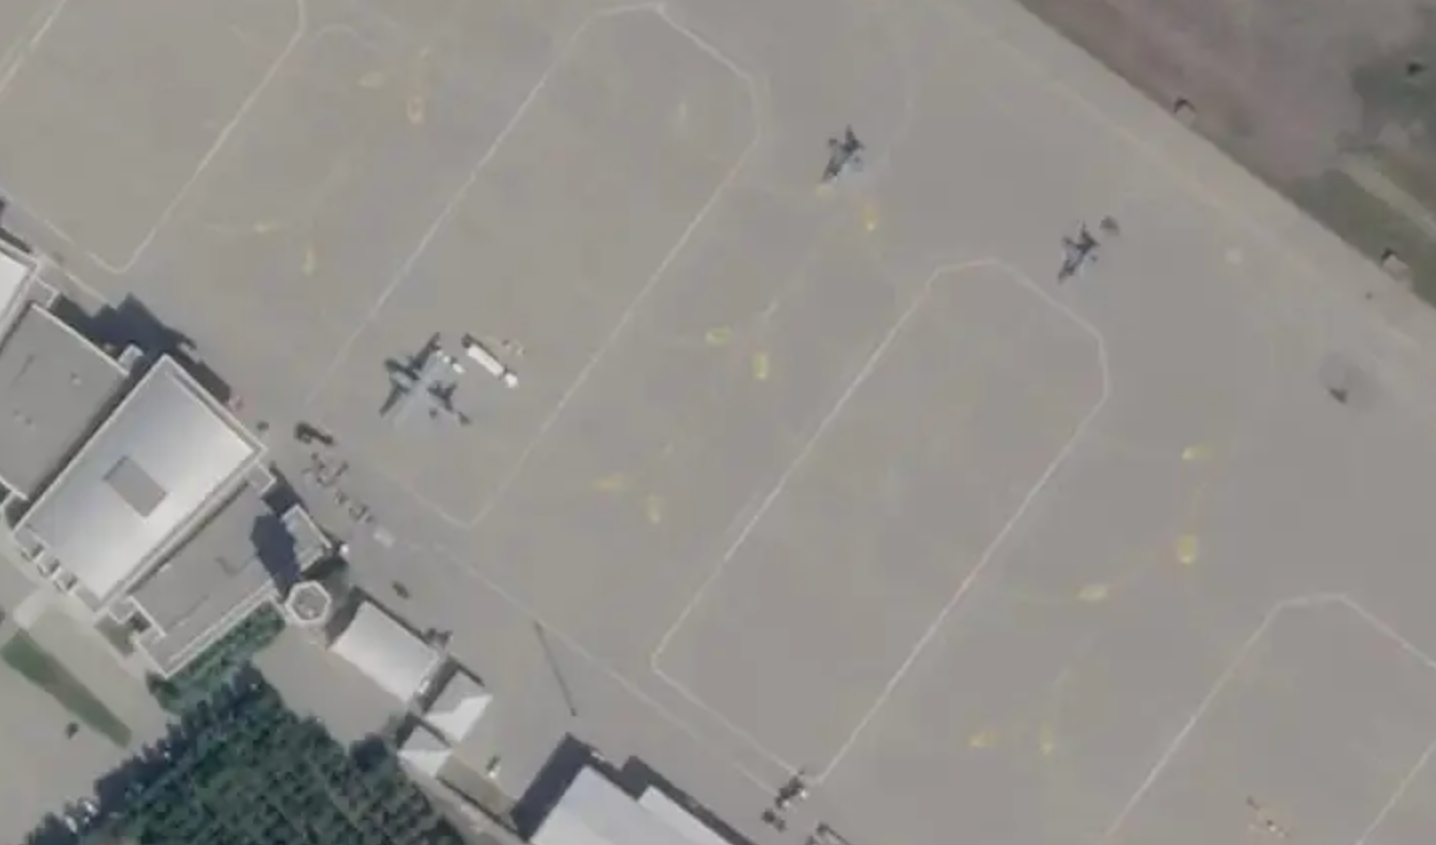 A closeup of a portion of Ganja International Airport in Azerbaijan on October 3, 2020, showing two Turkish F-16s and what appears to be a CN235 light transport aircraft.&nbsp;<em>PHOTO © 2020 PLANET LABS INC. ALL RIGHTS RESERVED. REPRINTED BY PERMISSION</em>